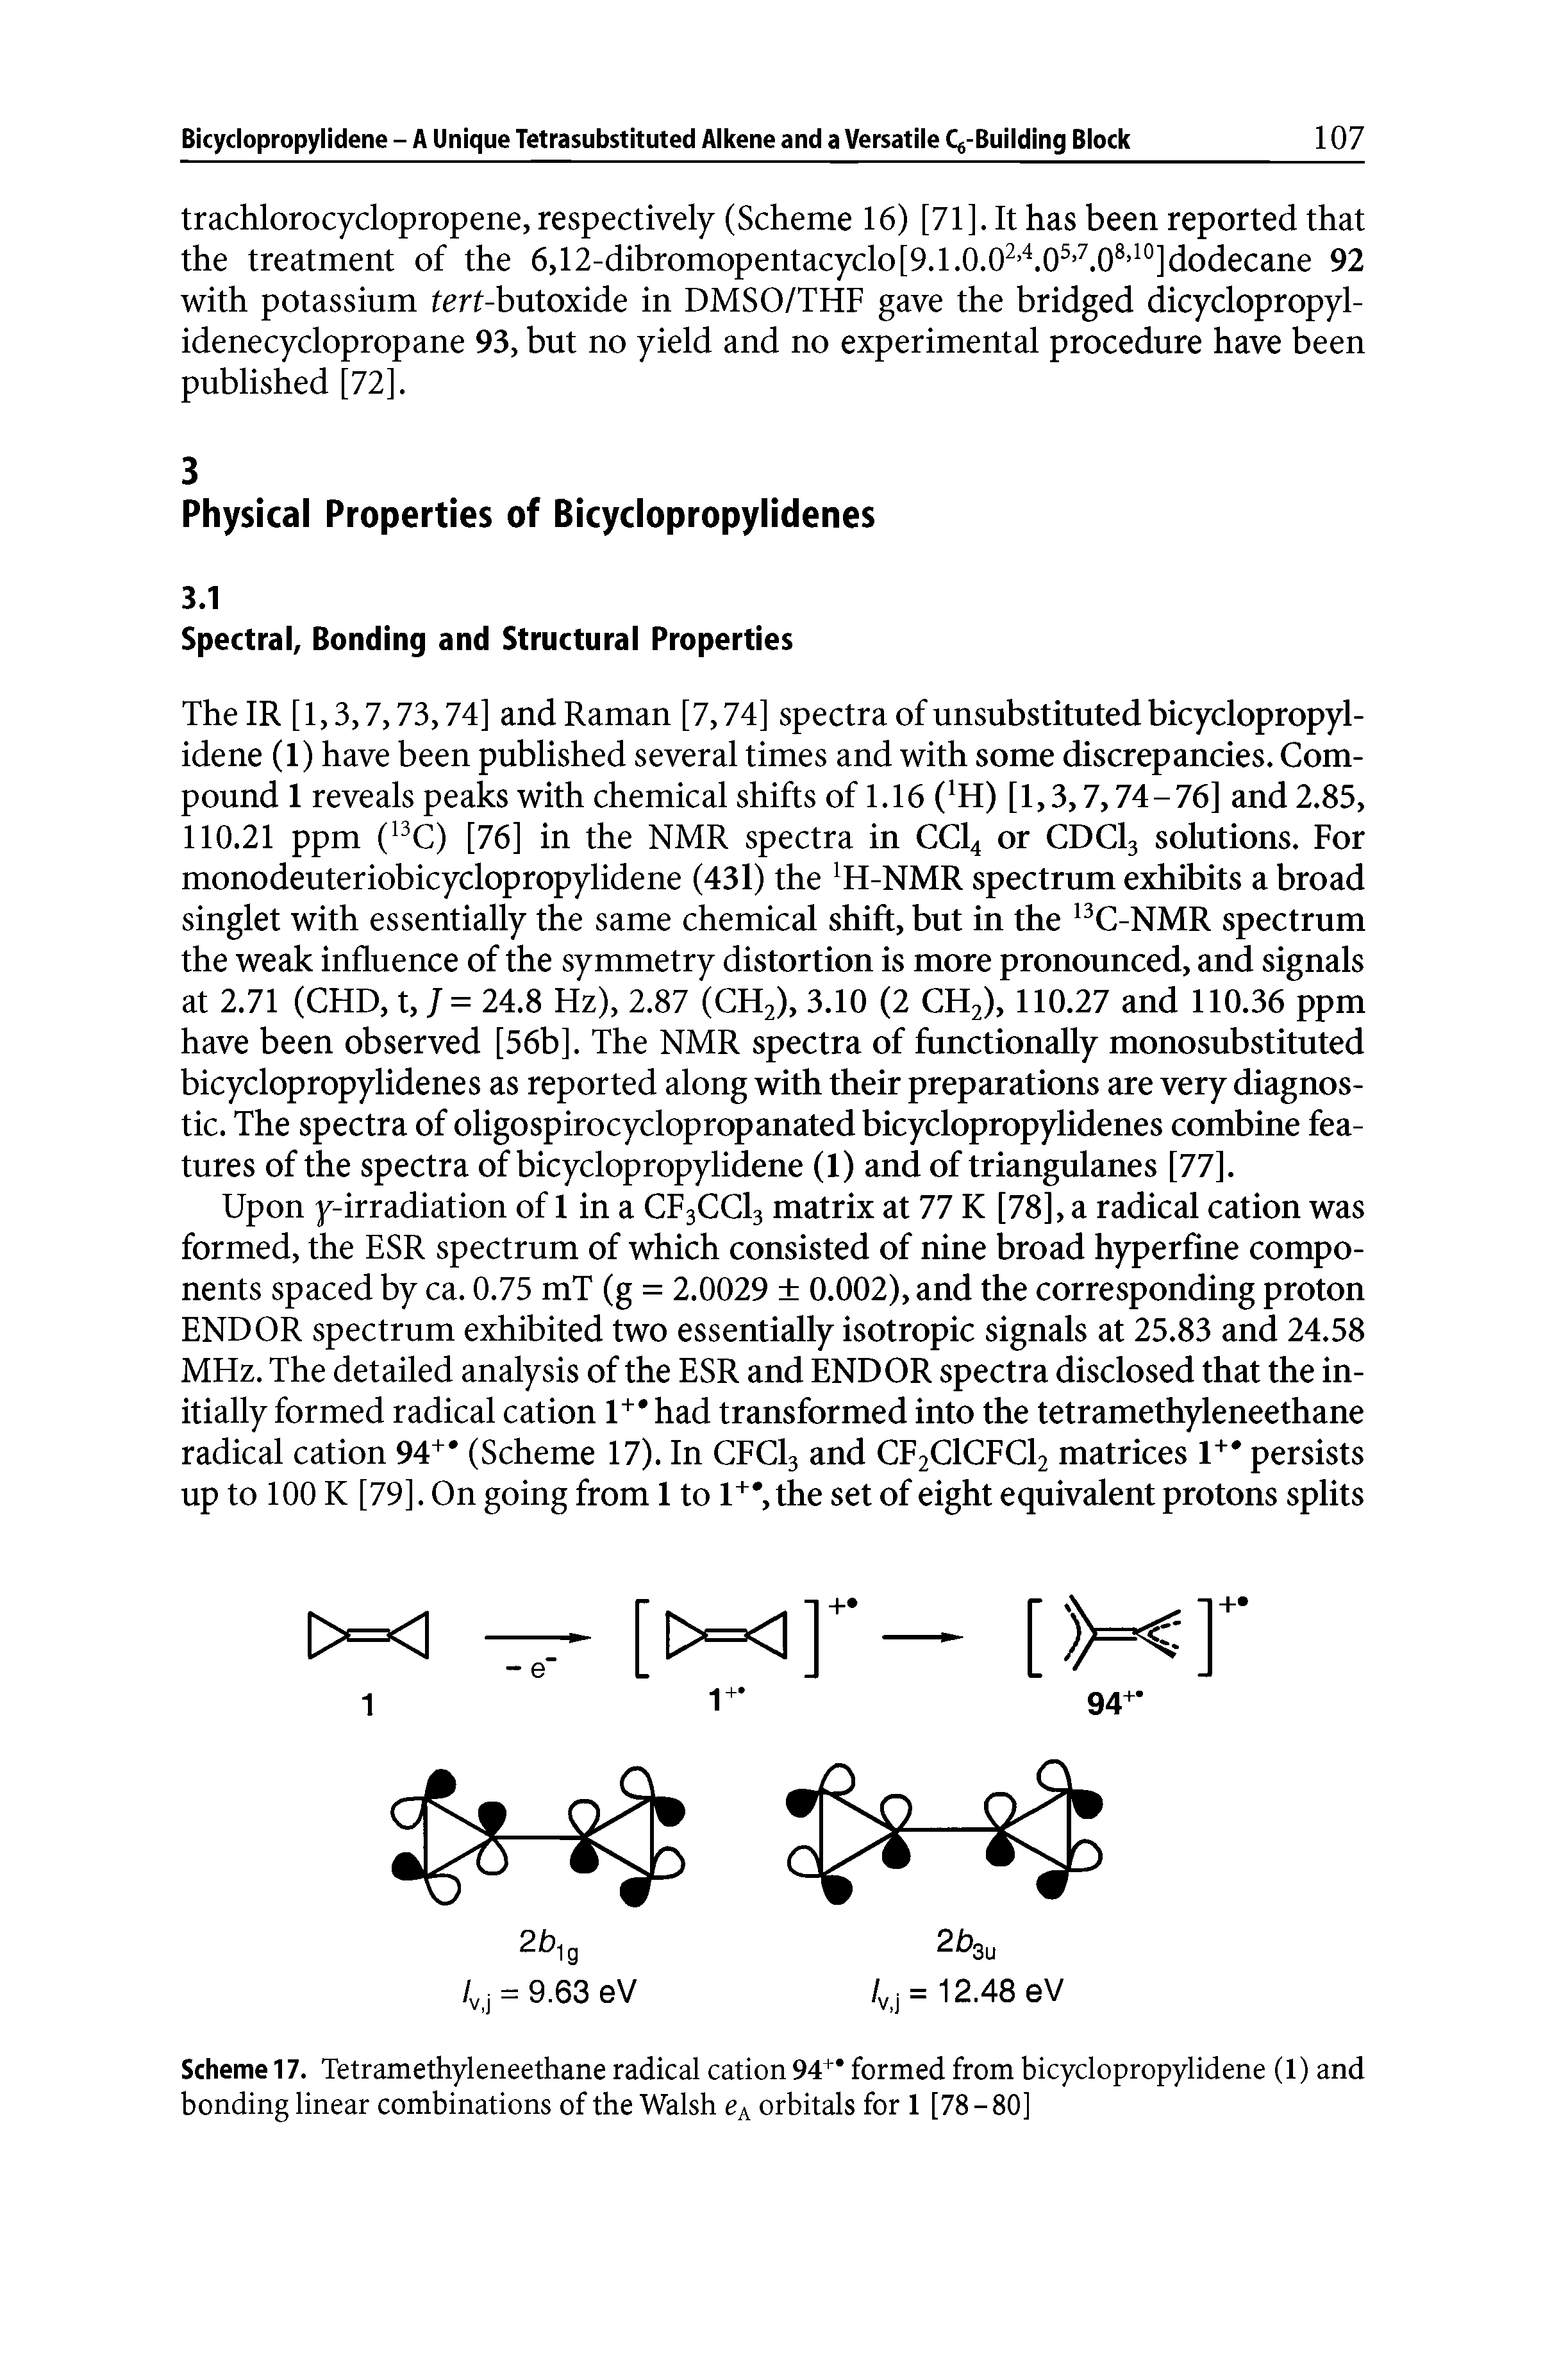 Scheme 17. Tetramethyleneethane radical cation 94+ formed from bicyclopropylidene (1) and bonding linear combinations of the Walsh orbitals for 1 [78-80]...